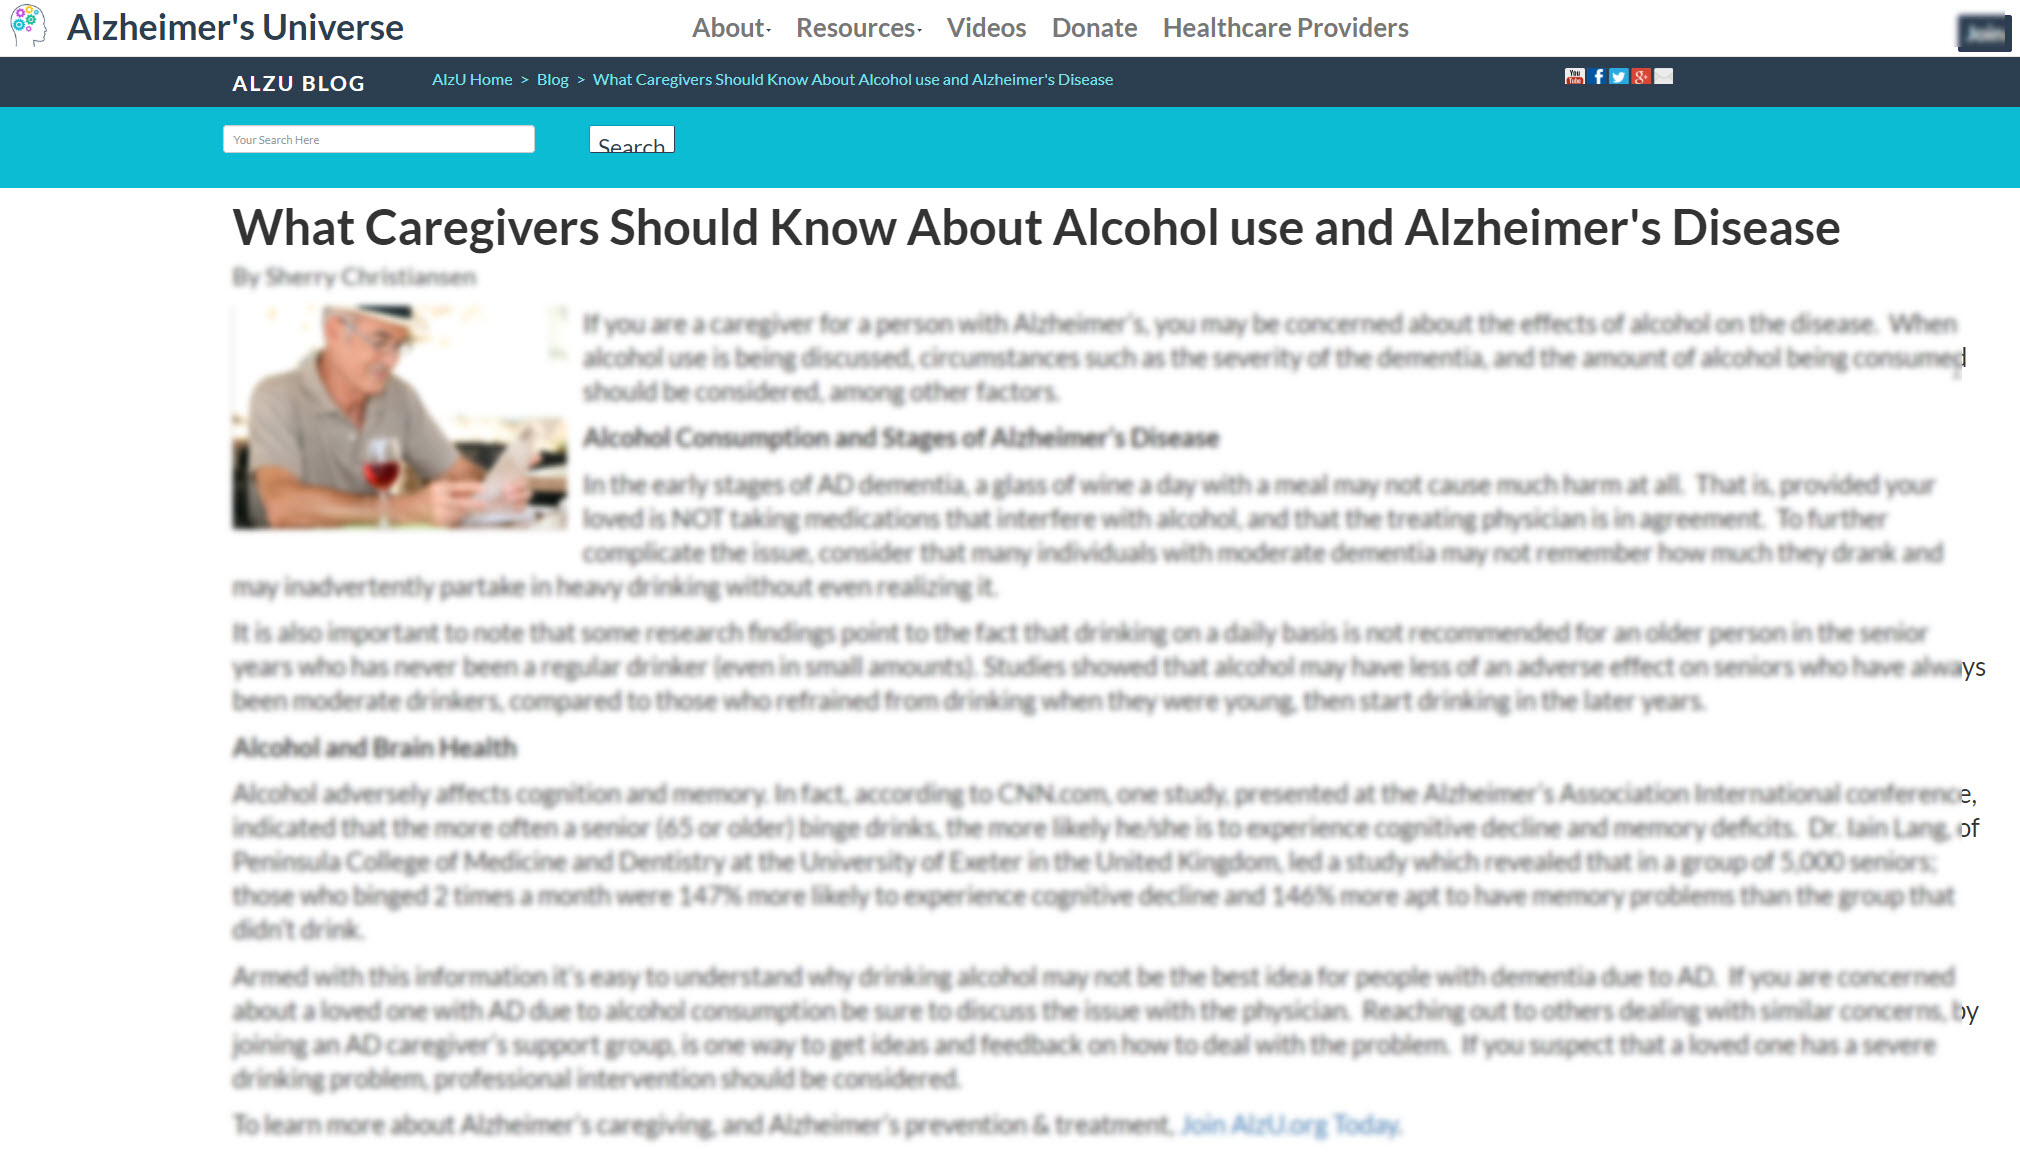 What Caregivers Should Know About Alcohol Use and Alzheimer's Disease